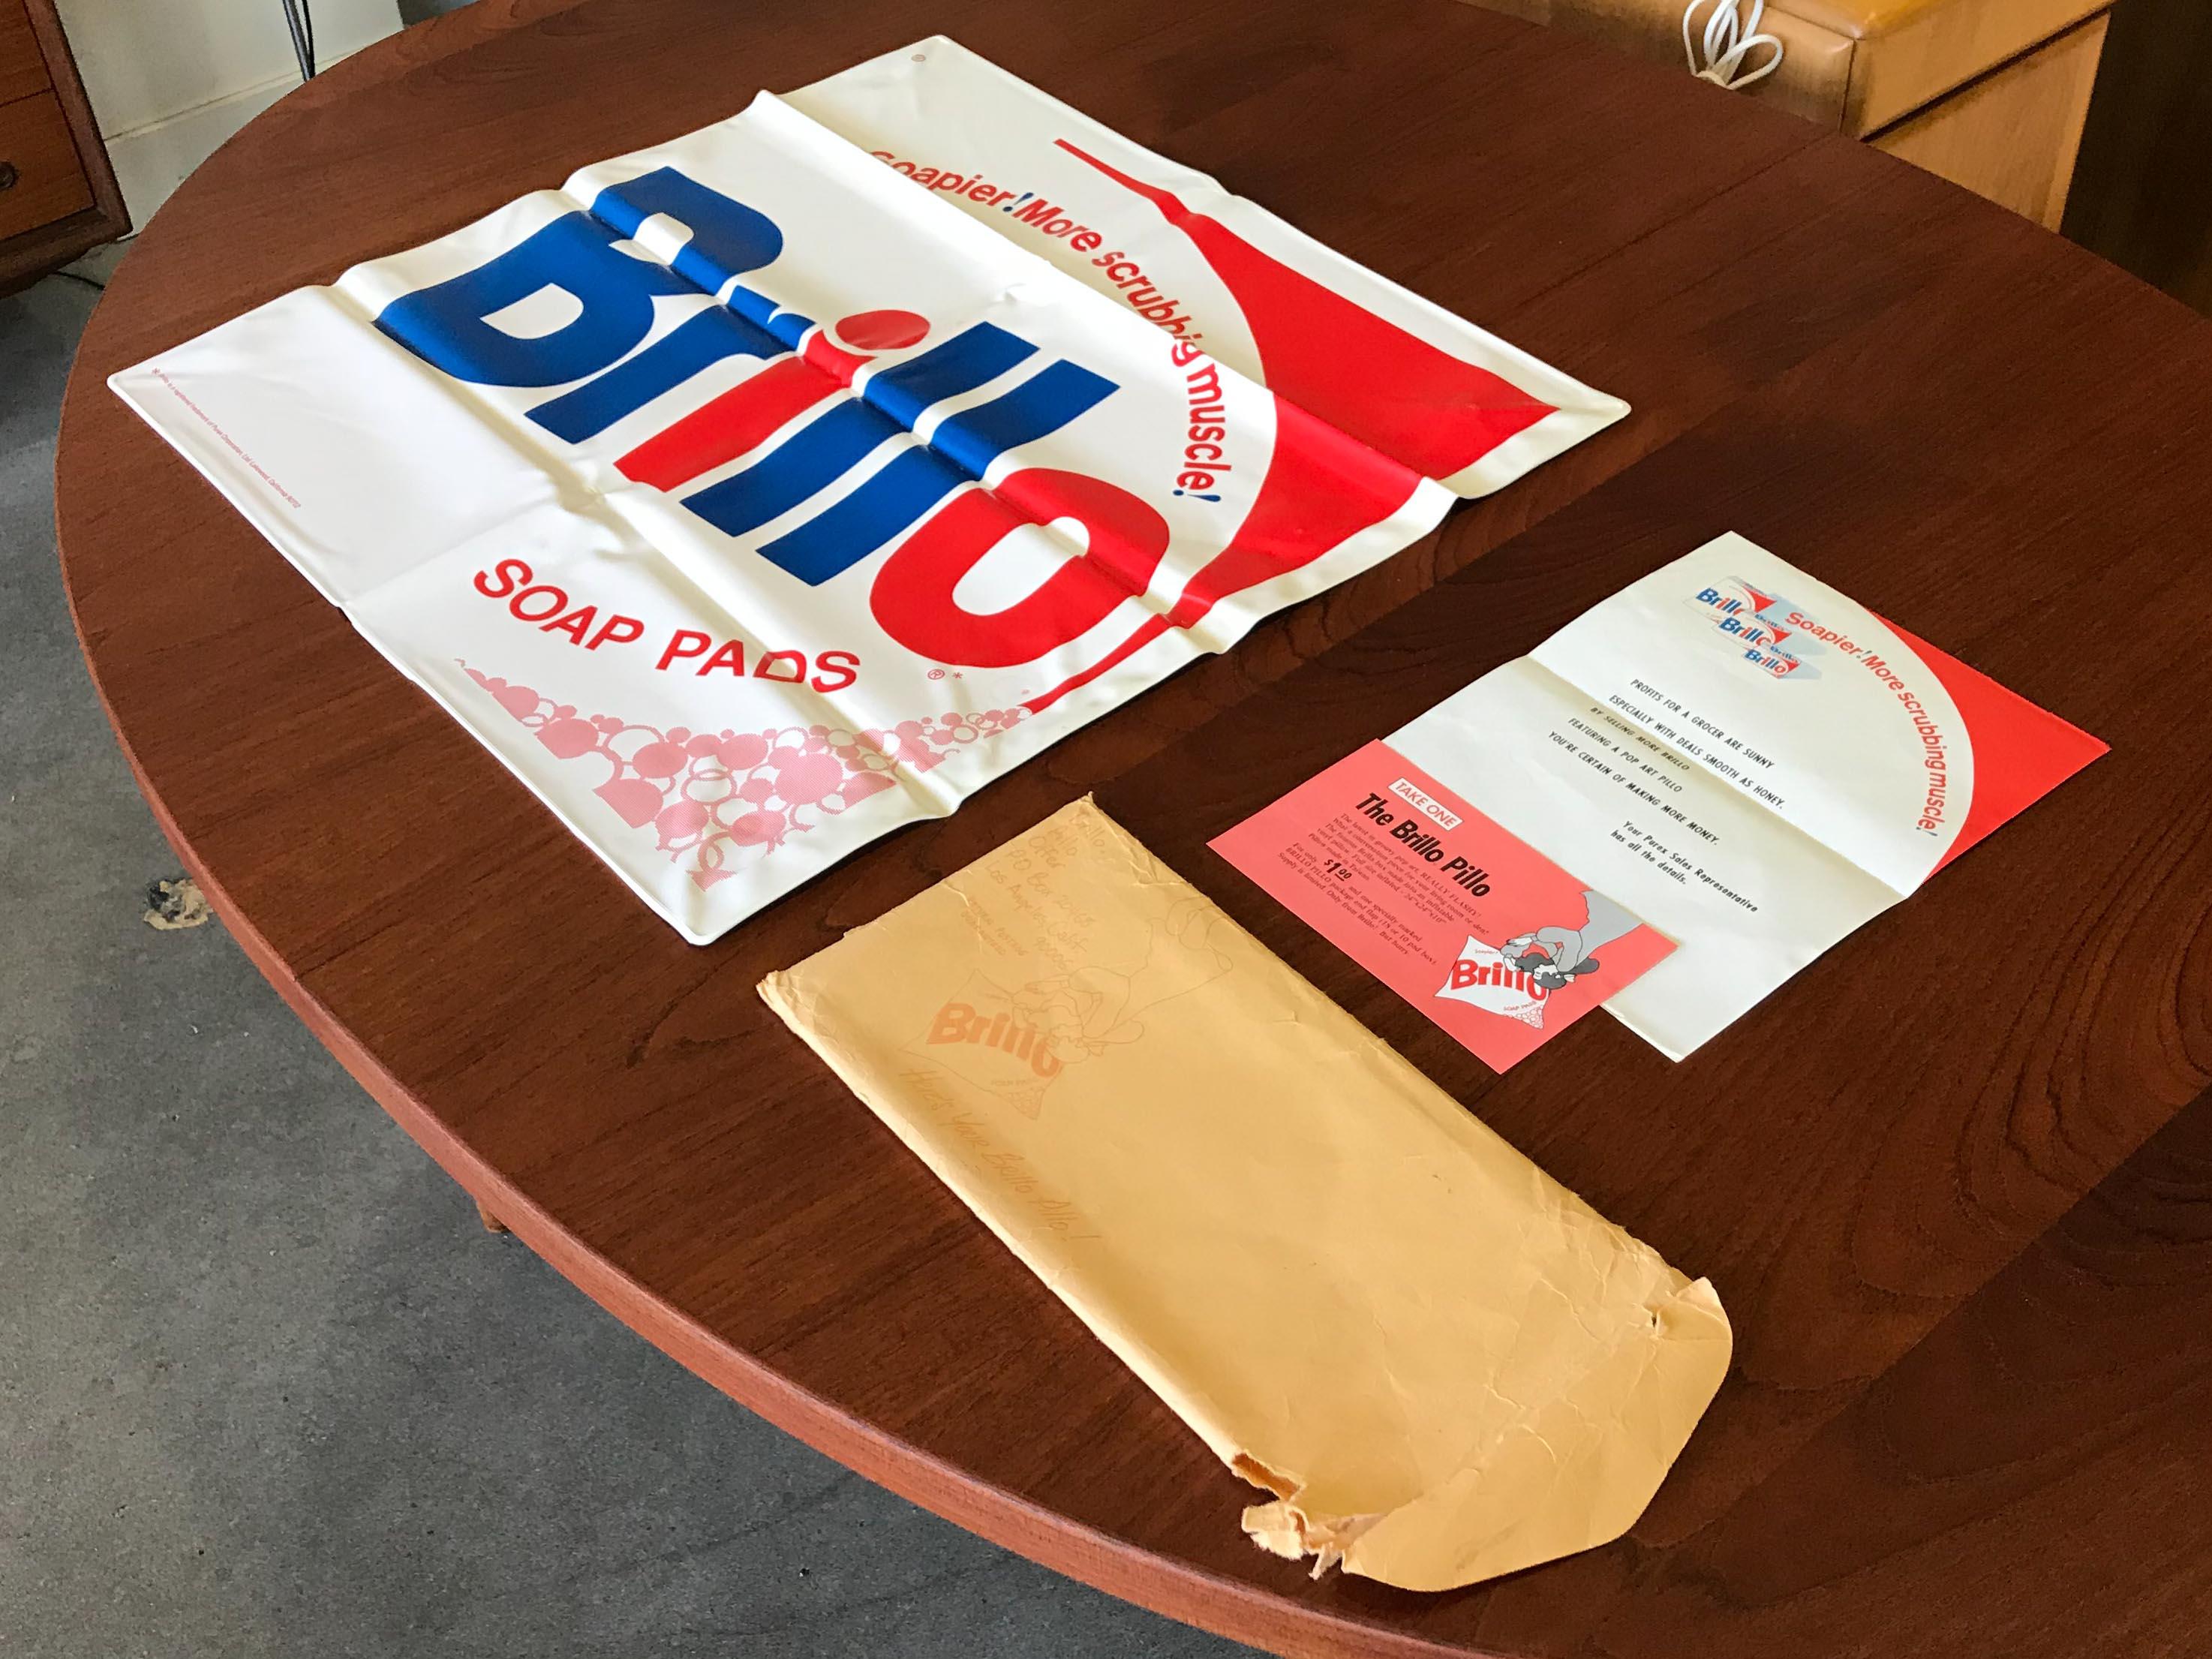 Brillo Pillow promotional advertising for Brillo Pads Purex Corporation from late 1960s.  This graphic design inspired Andy Warhol's famed Brillo sculptures.

Includes original documentation from the Brillo Corporation and mailing envelope stamped